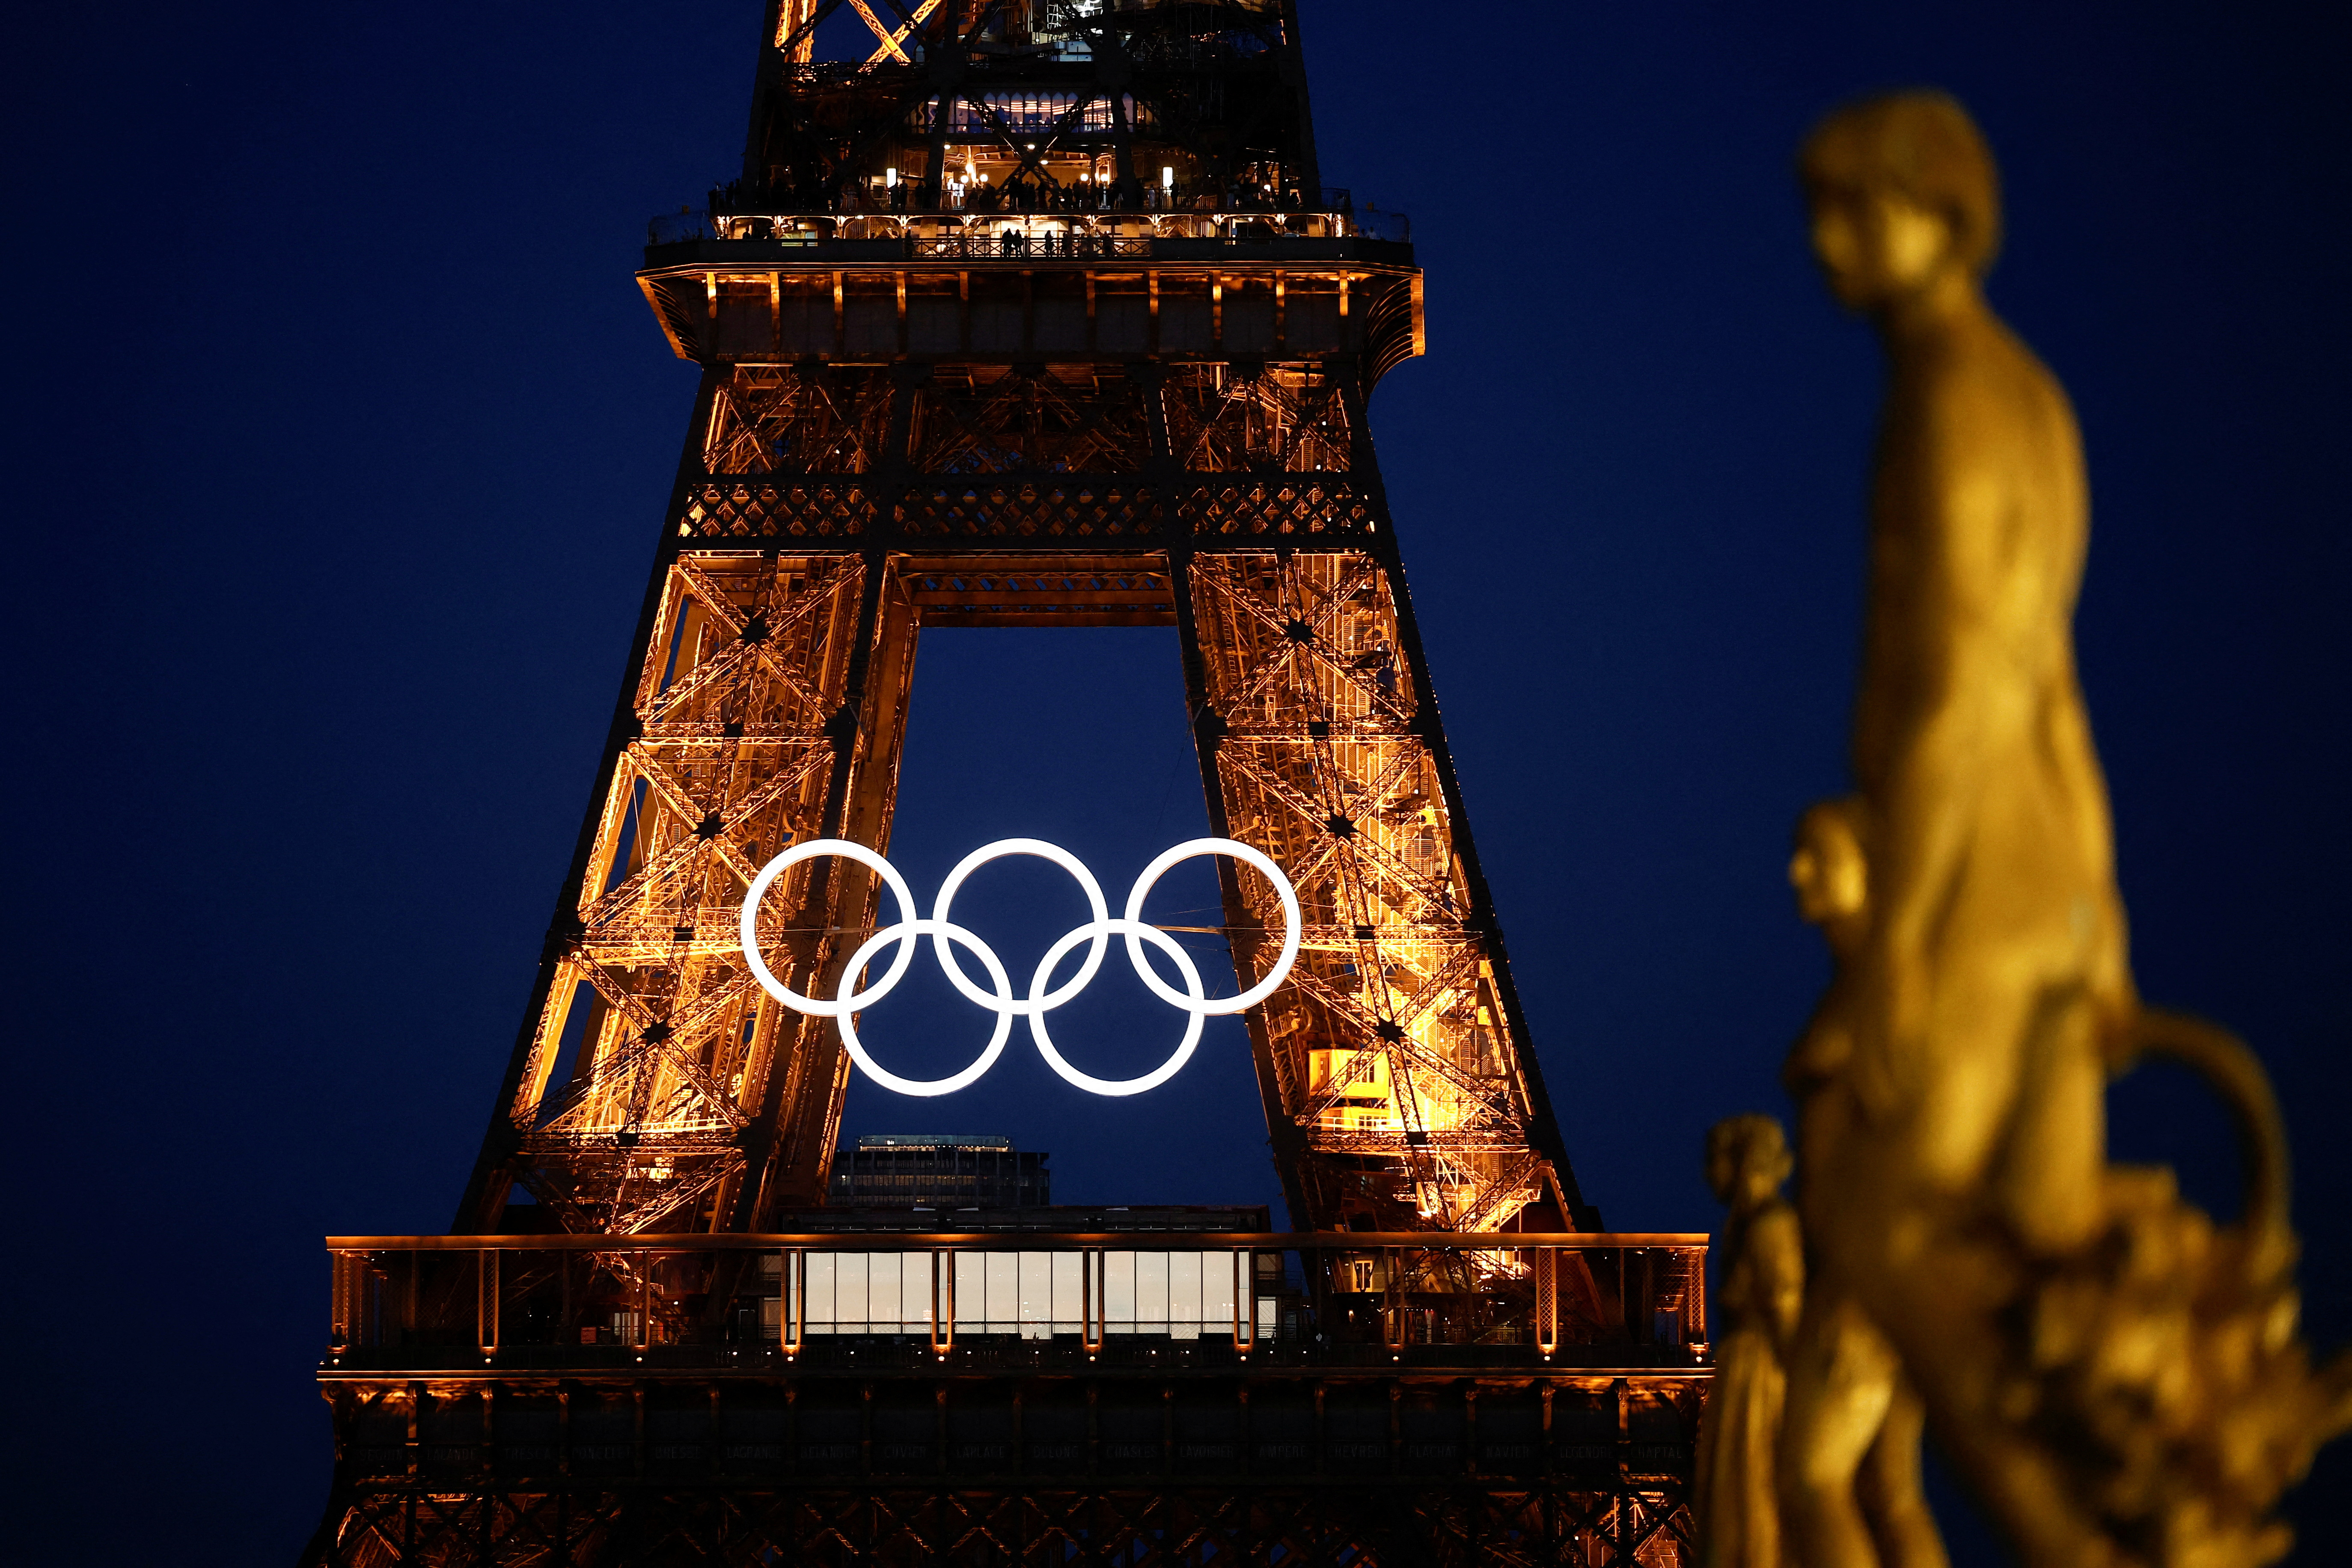 The Olympic rings displayed on the first floor of the Eiffel Tower